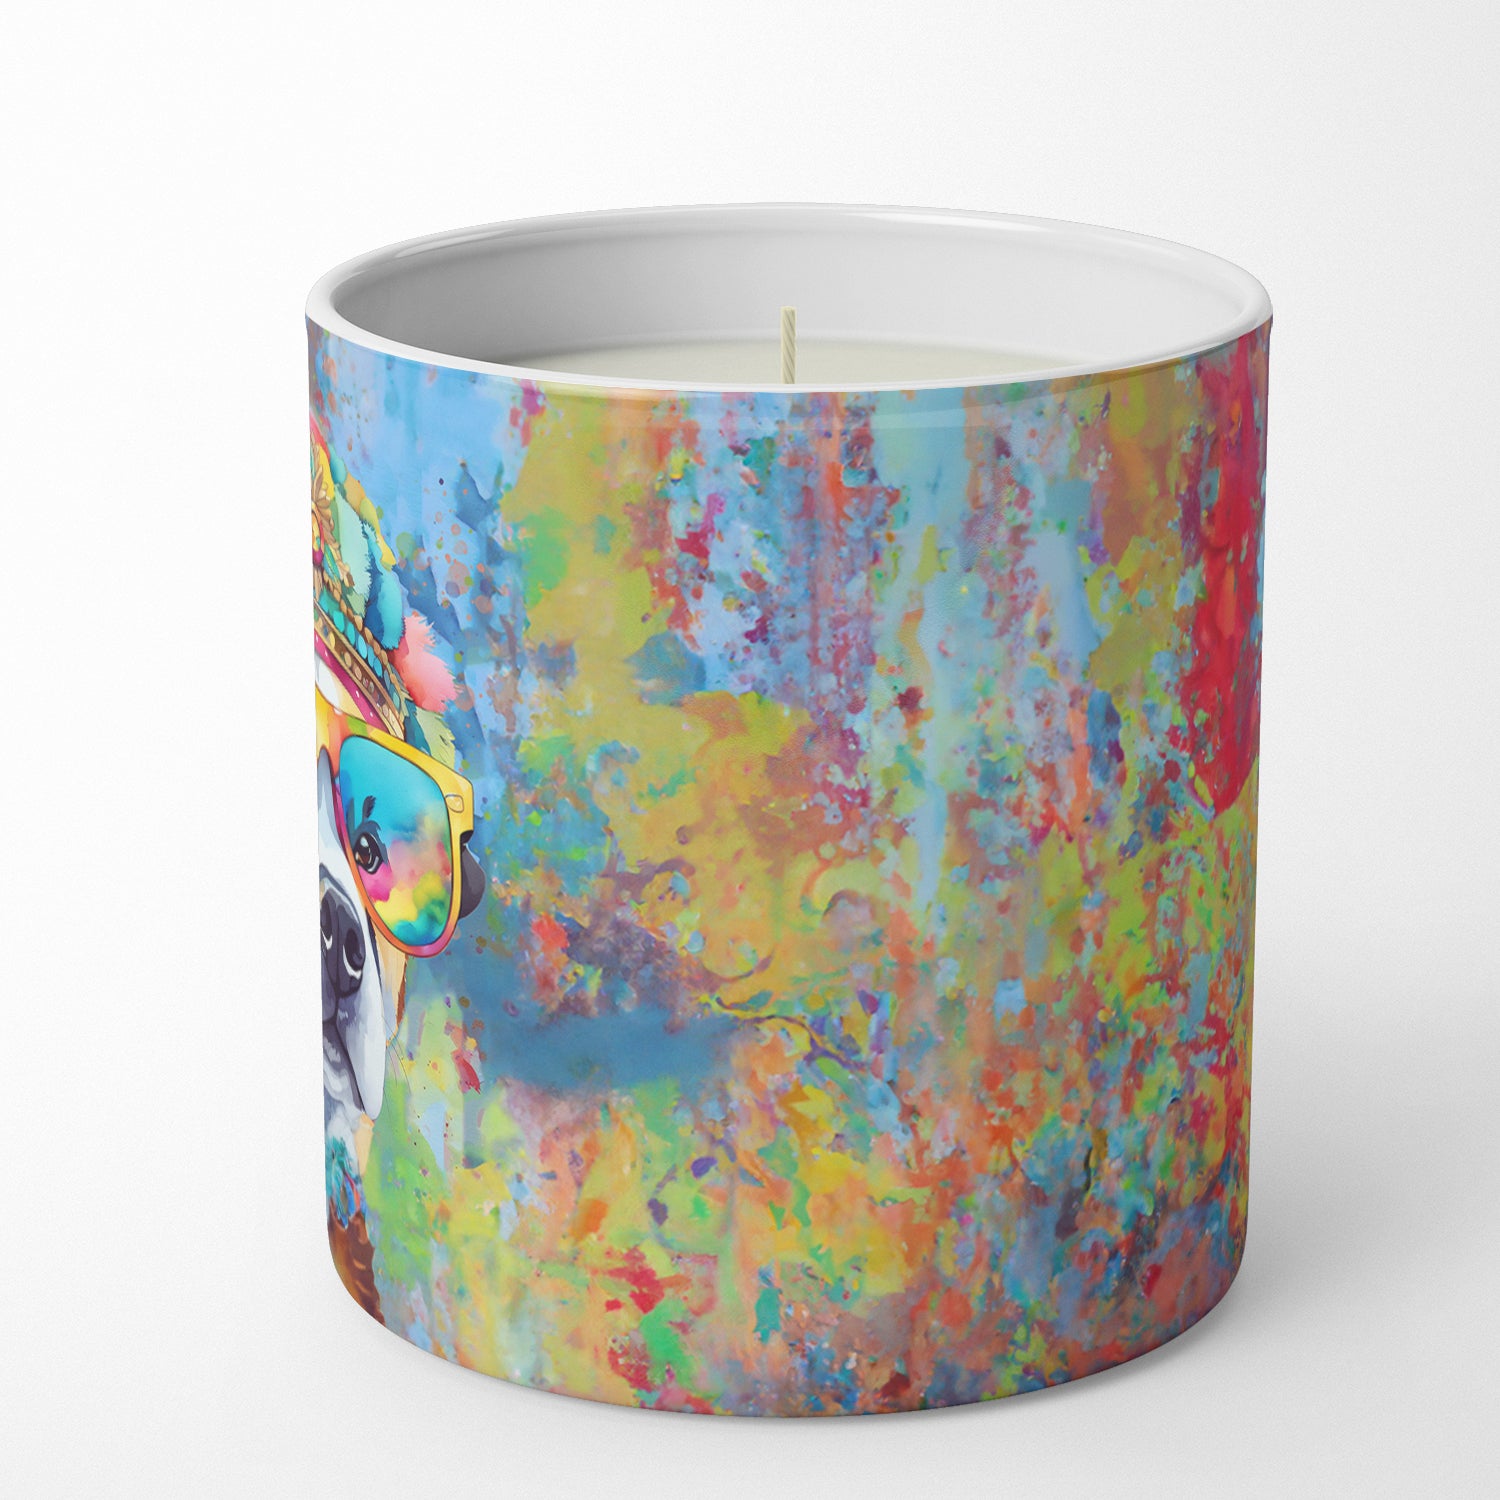 Akita Hippie Dawg Decorative Soy Candle